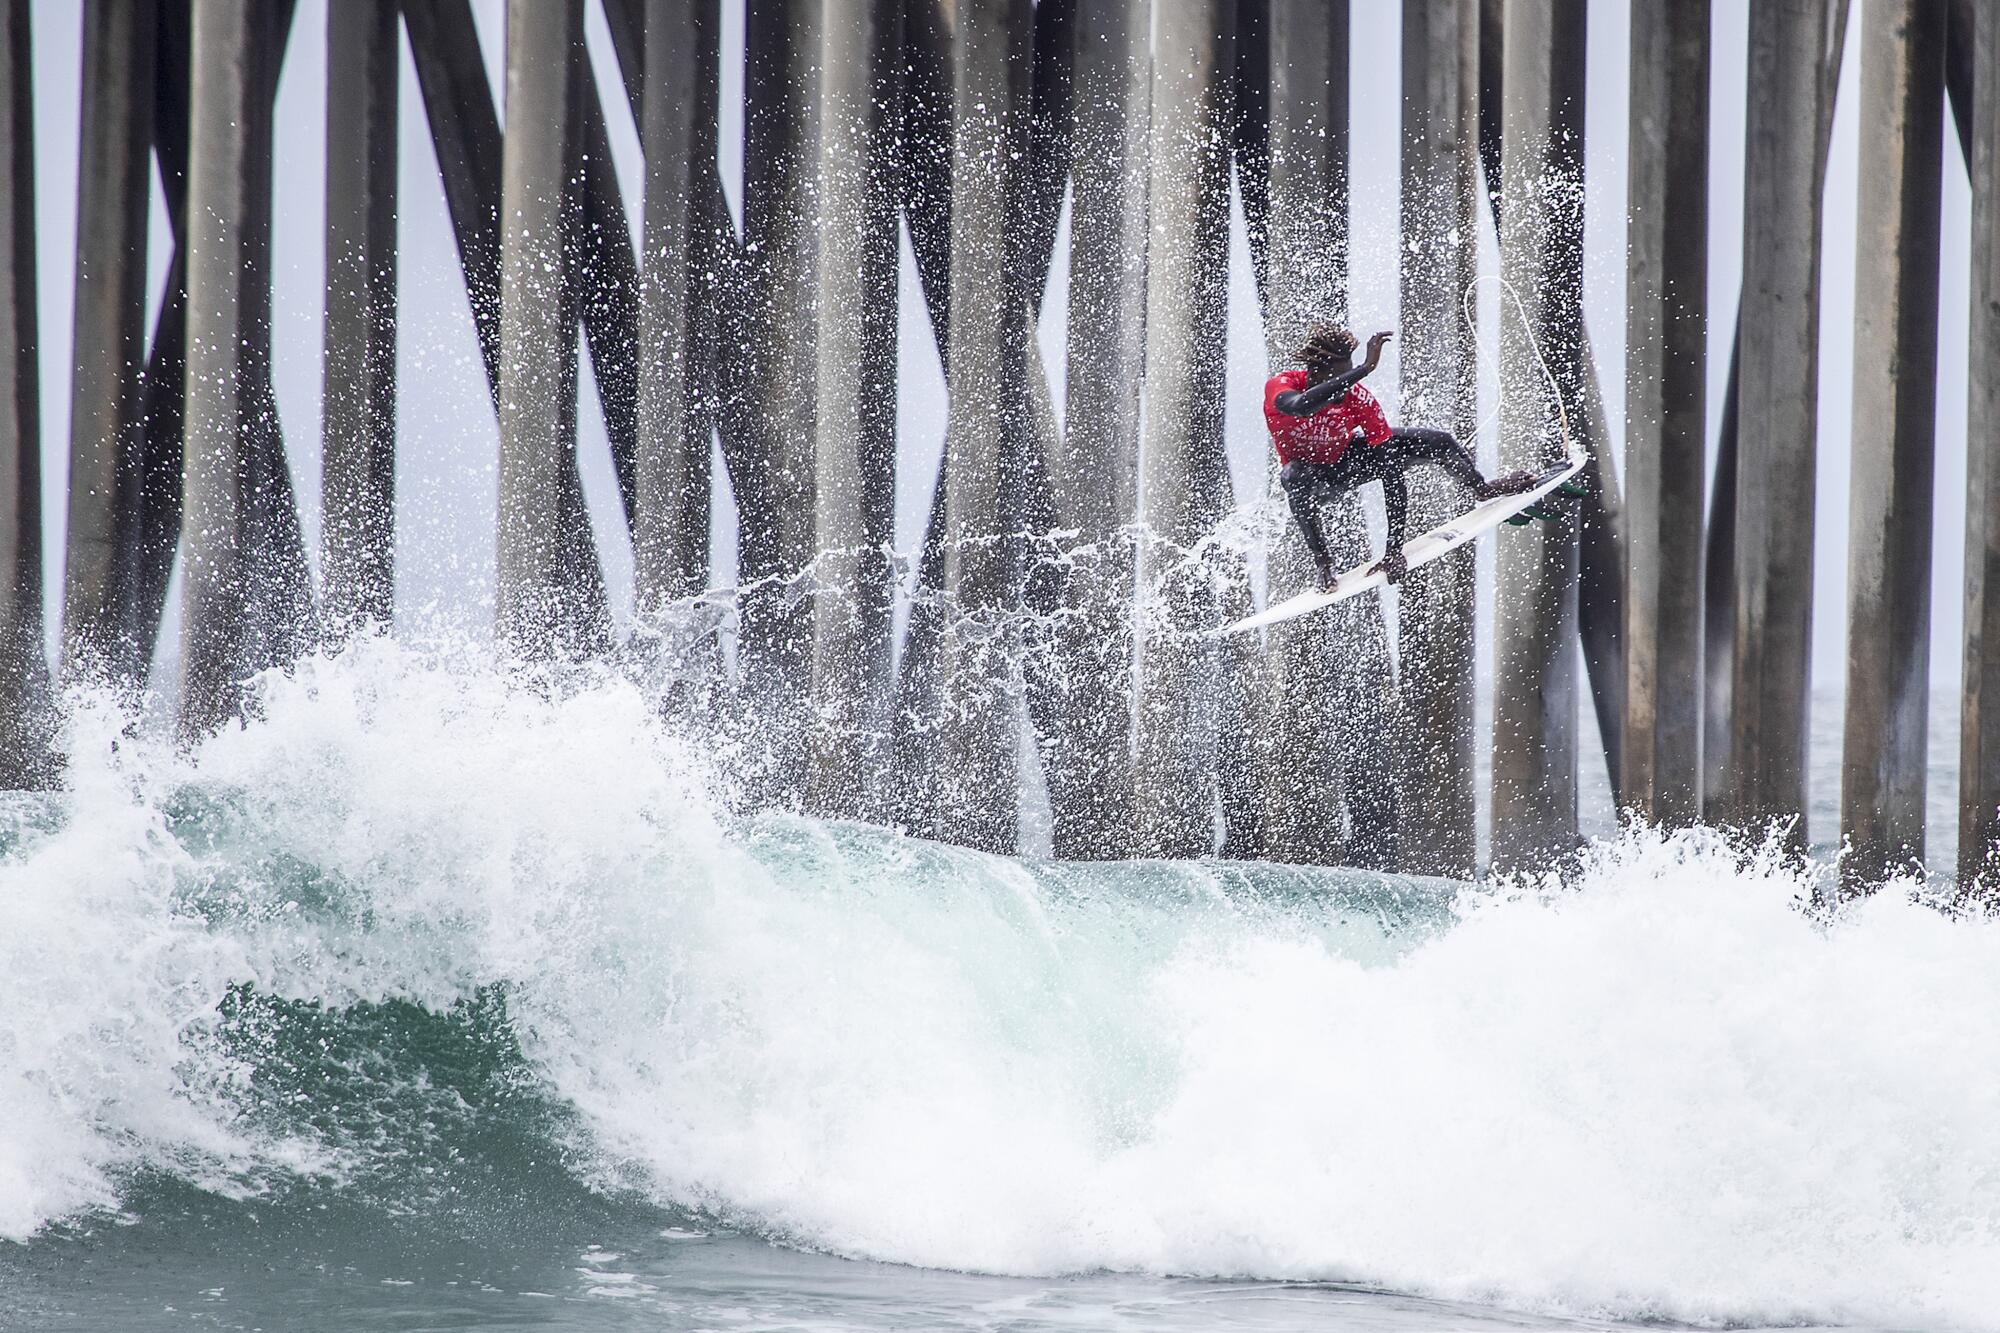 Cherif Fall goes airborne during the surf competition.